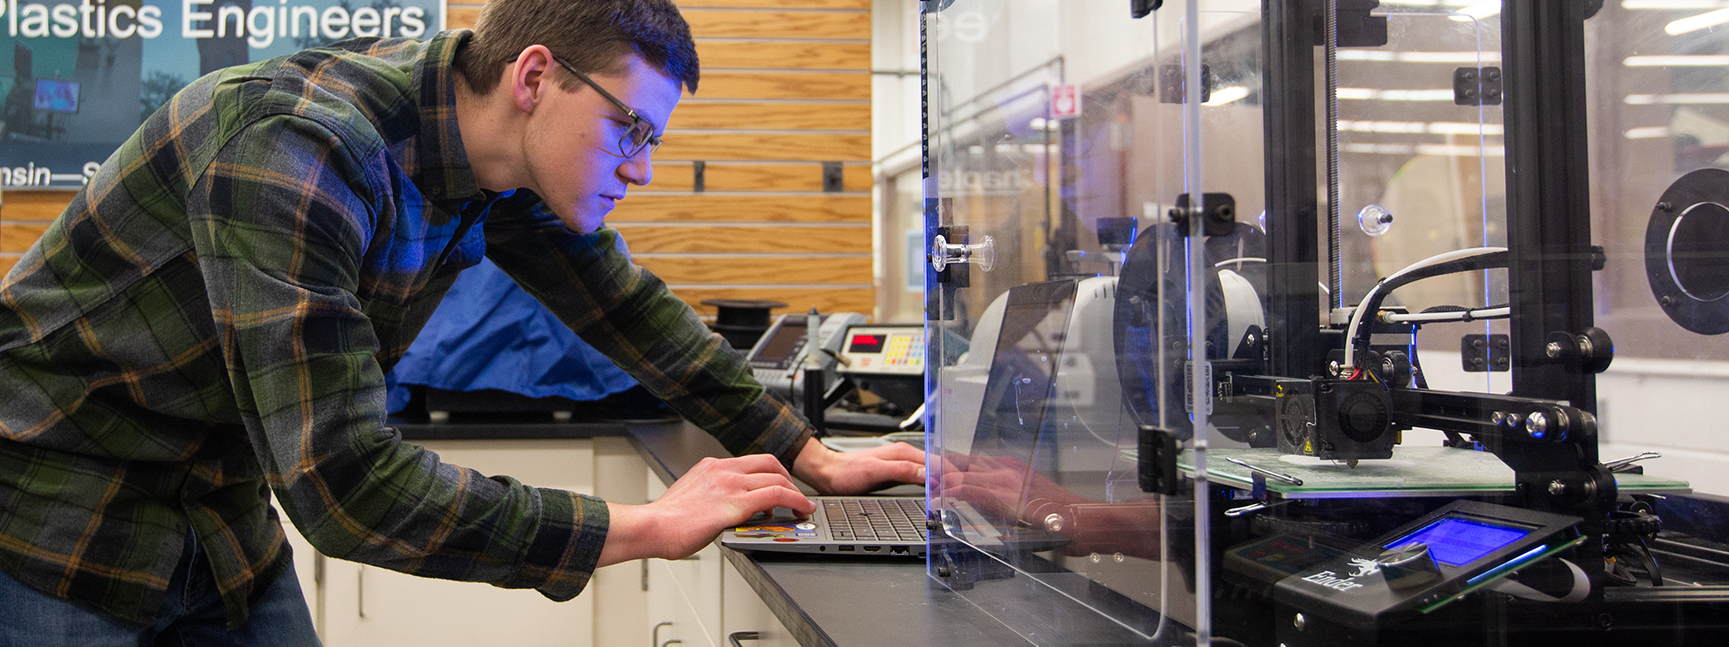 Student uses the 3D Printer in the lab space